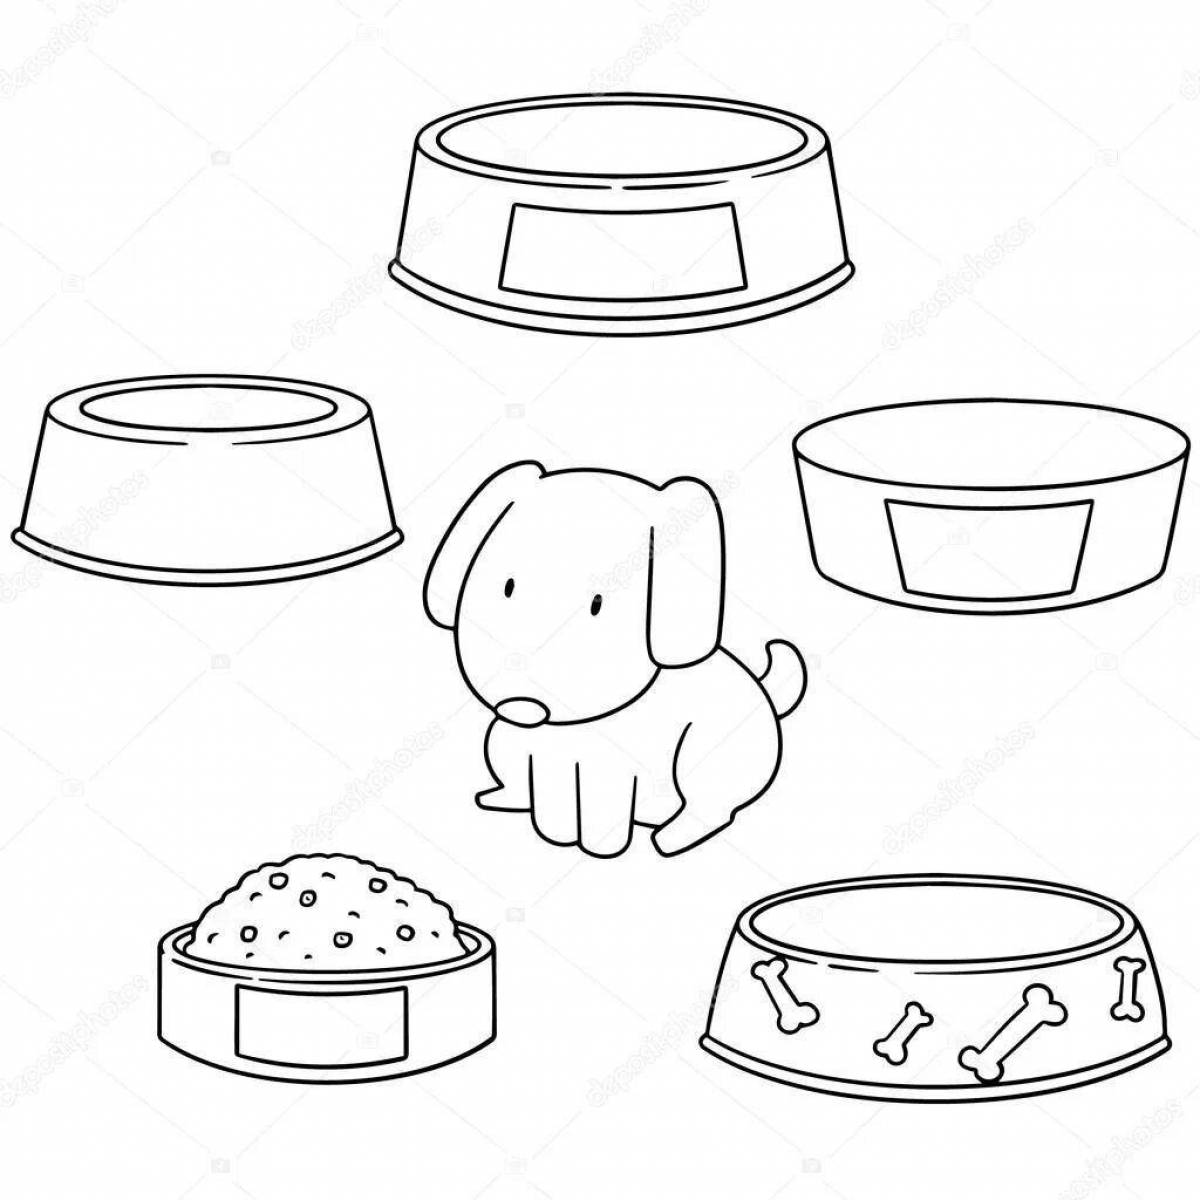 Coloring book adorable toys for dogs